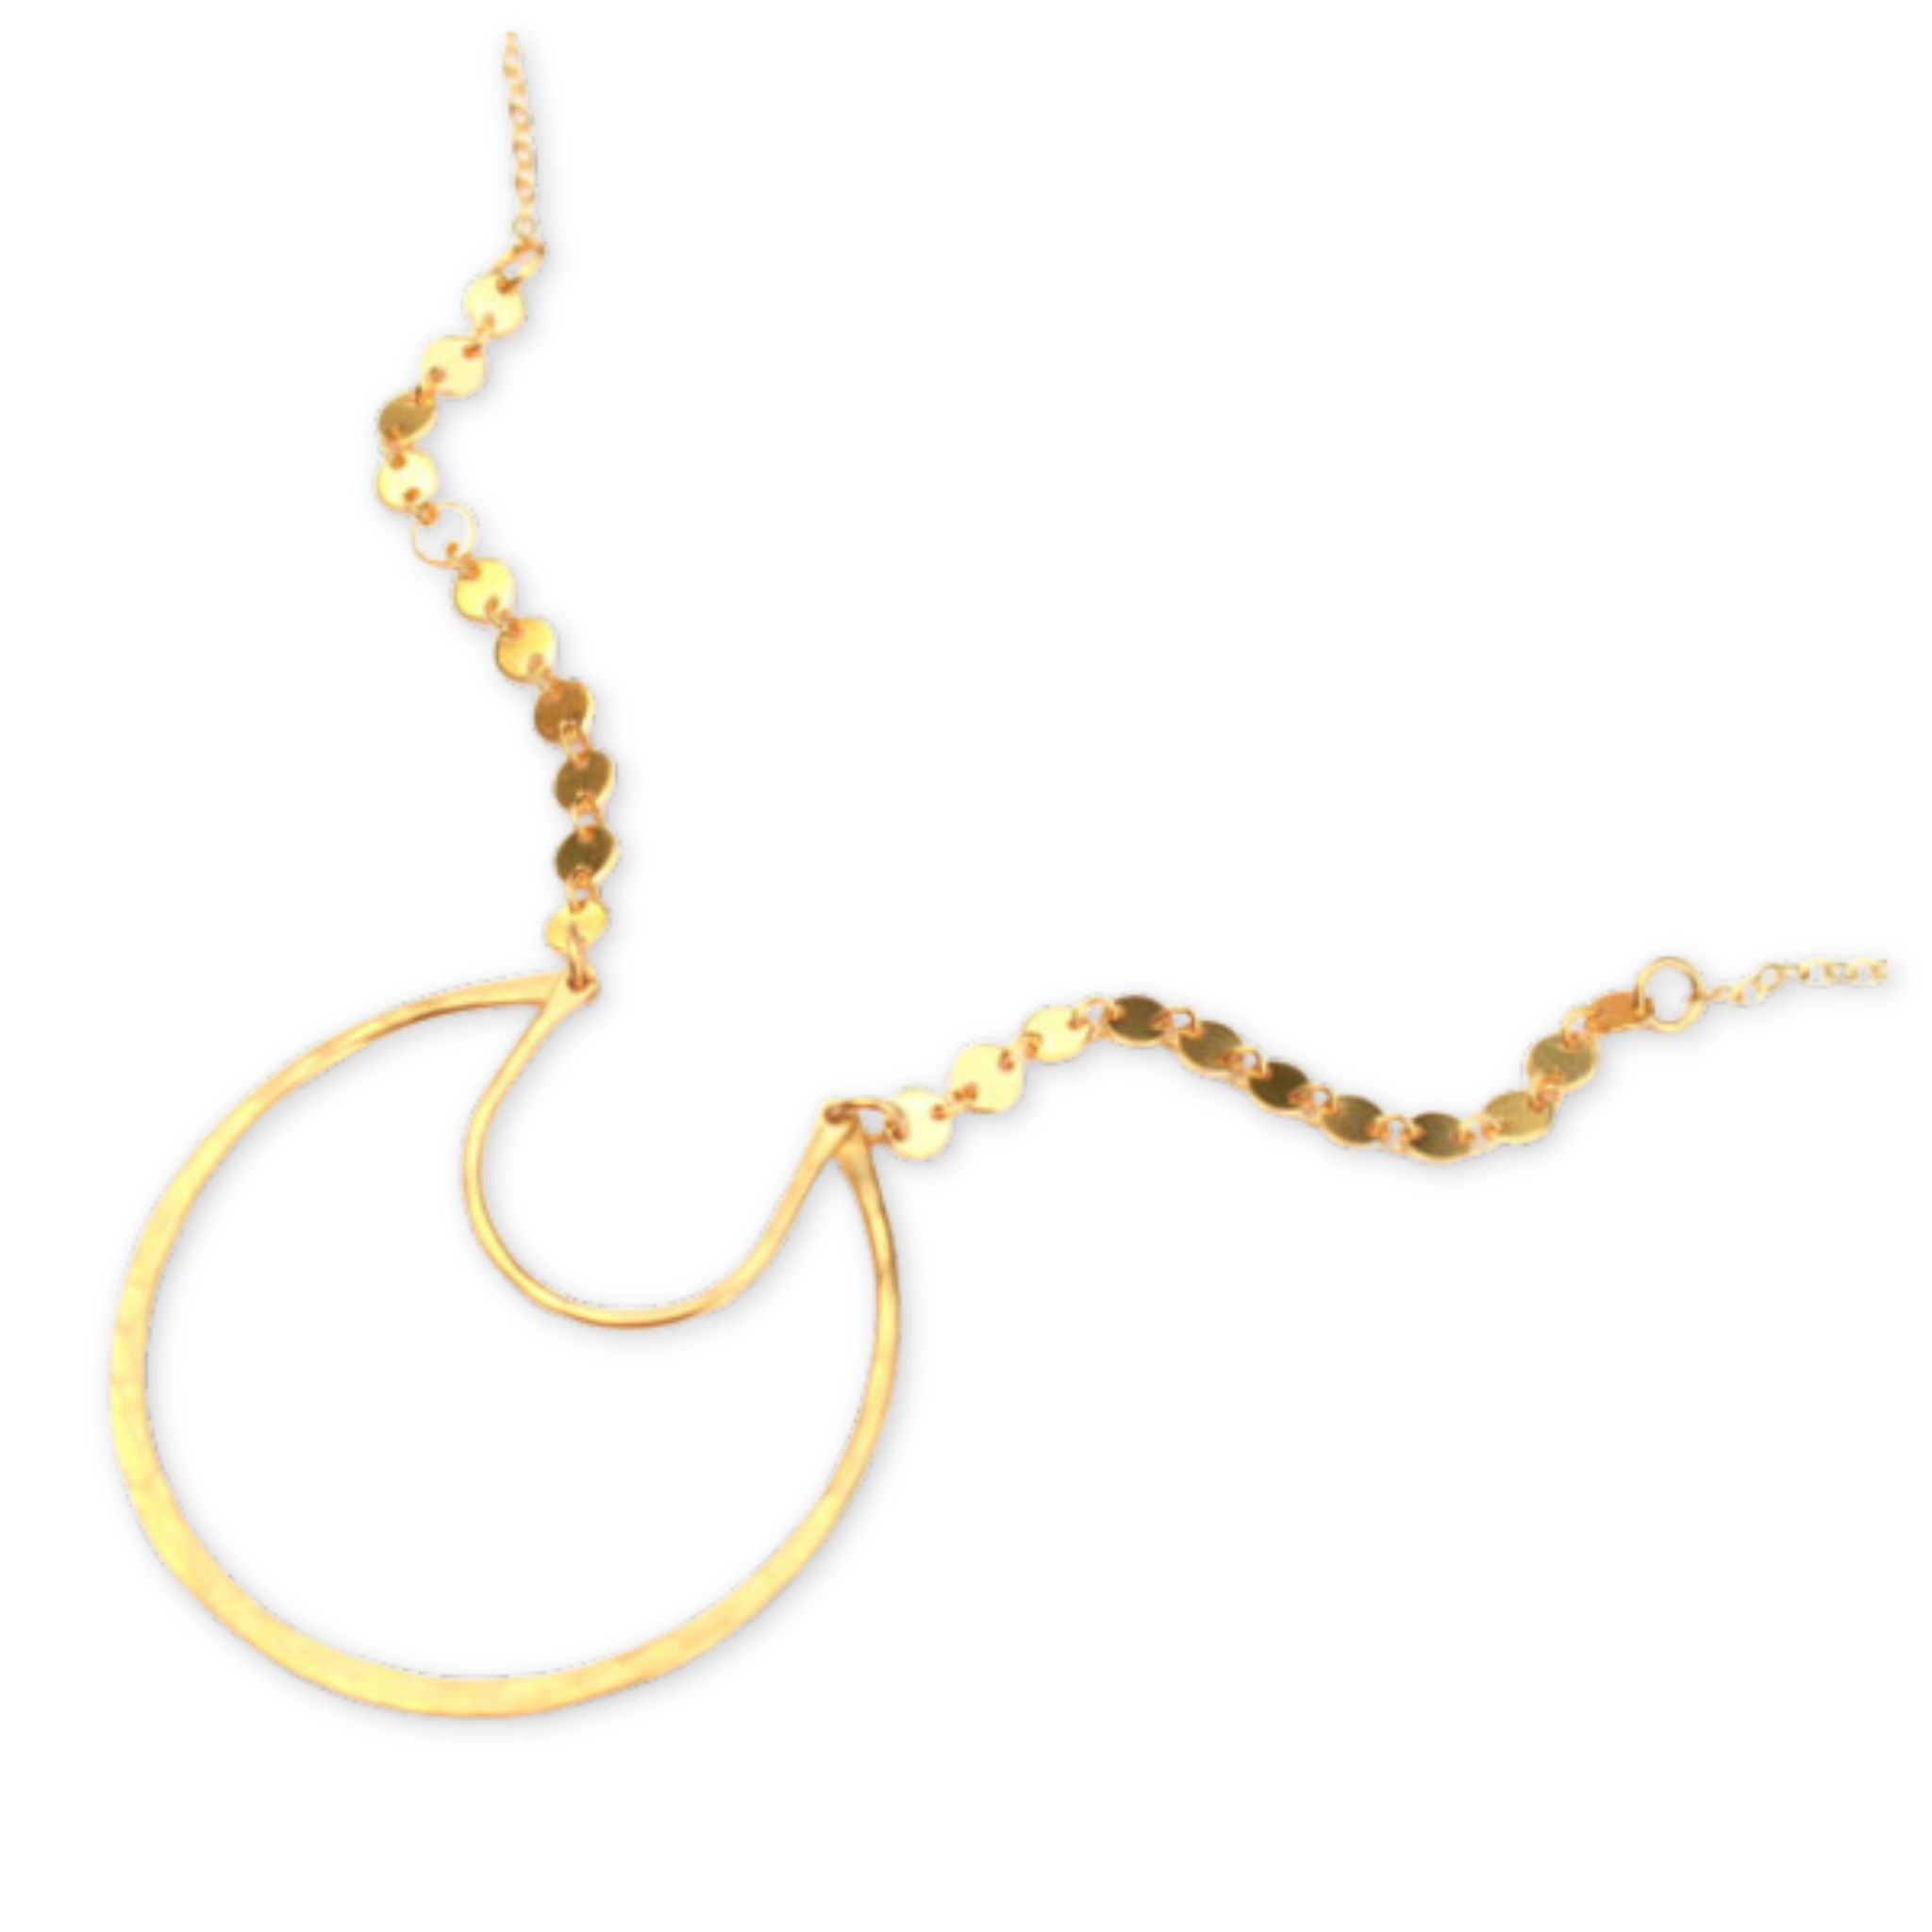 crescent moon shaped pendant hanging from a necklace chain made of tiny round discs